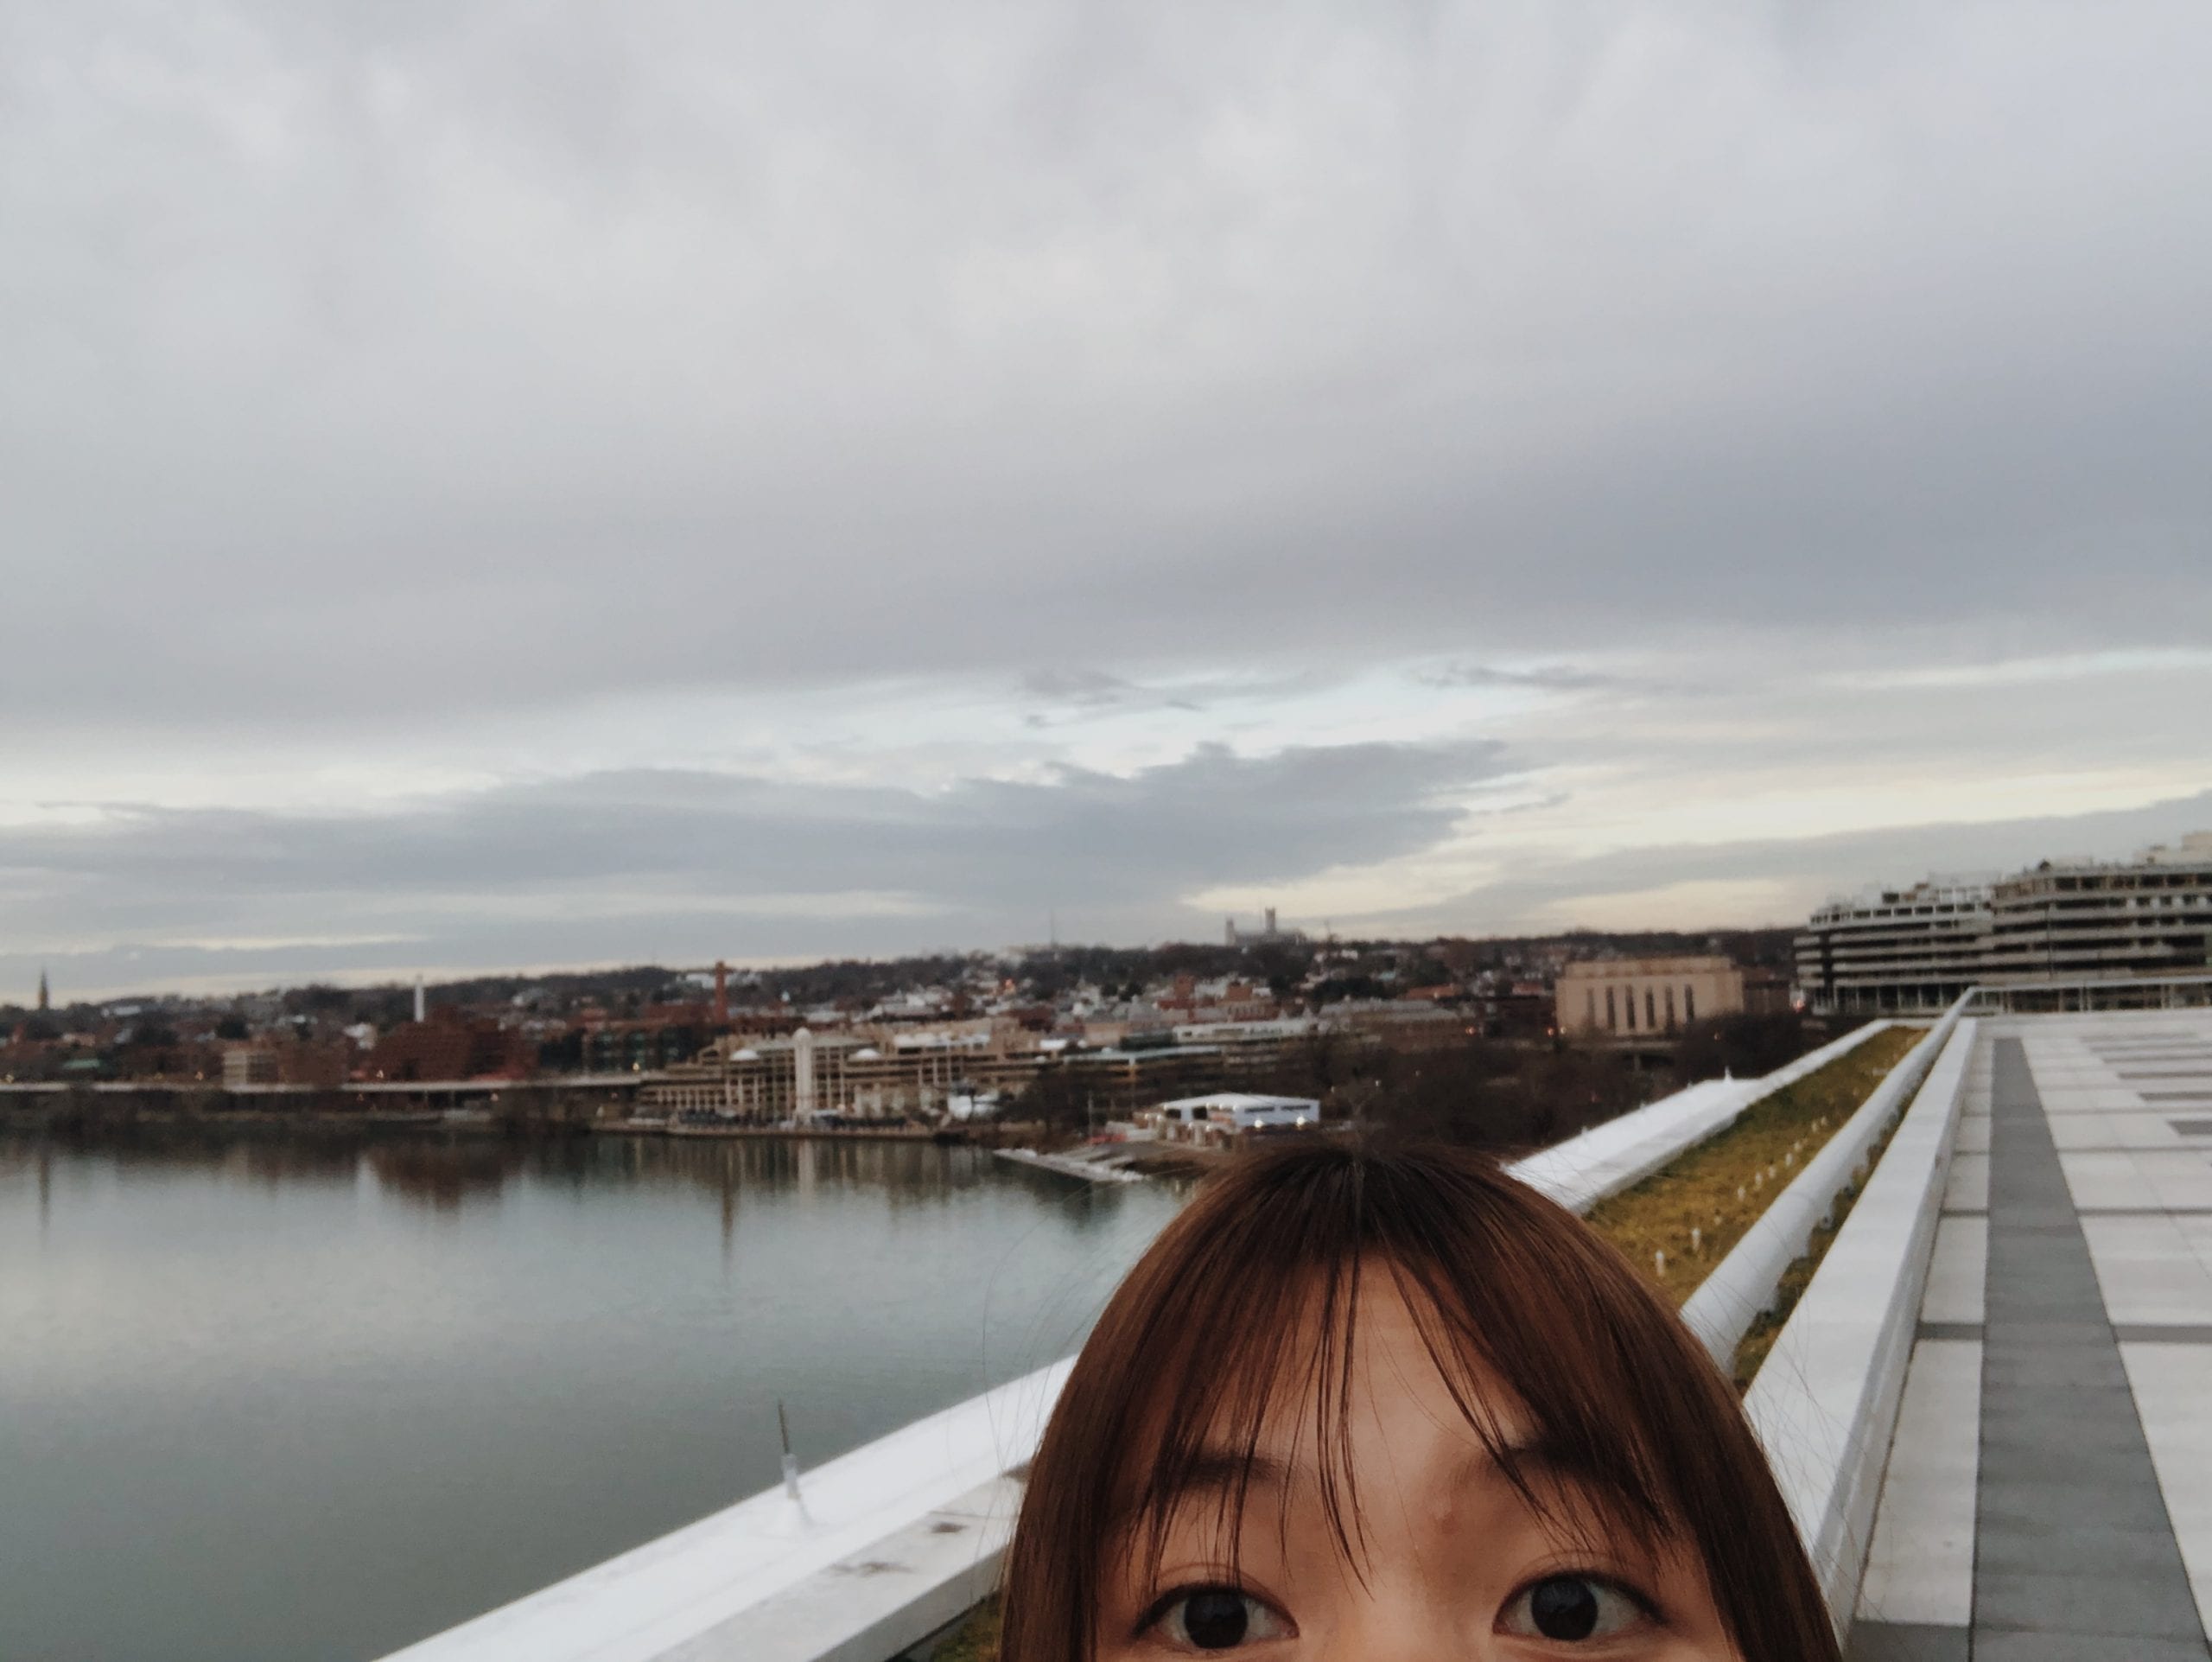 A student's selfie in front of a river from the top of the Kennedy Center. The neighborhood of Georgetown can be seen behind the river.